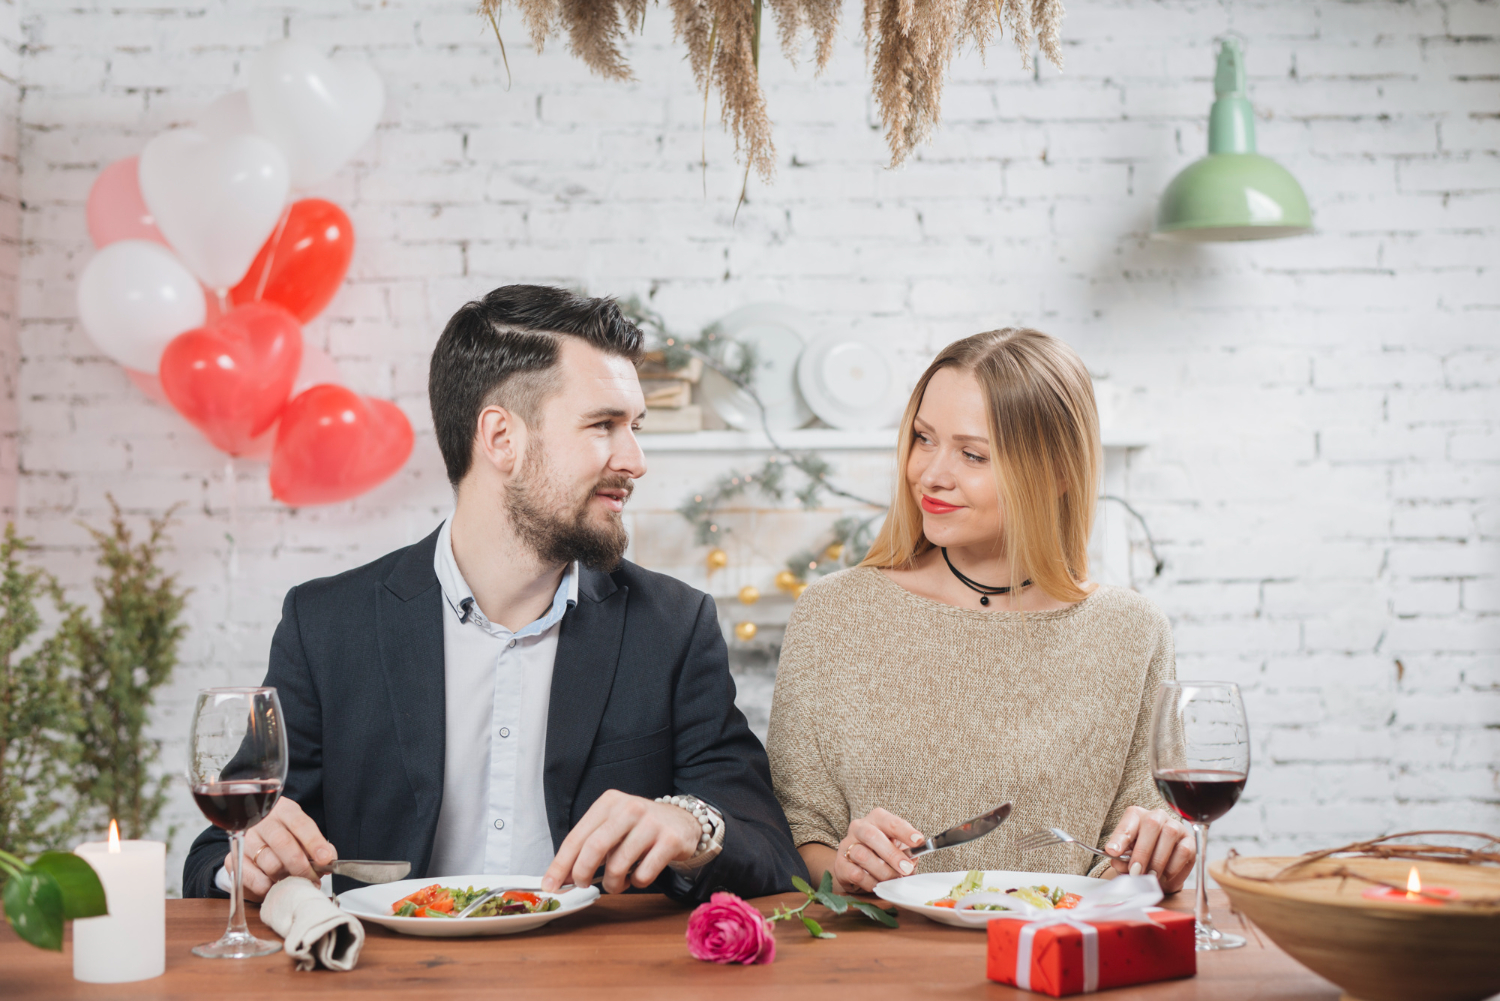 Romantic Birthday Greetings for Your Partner